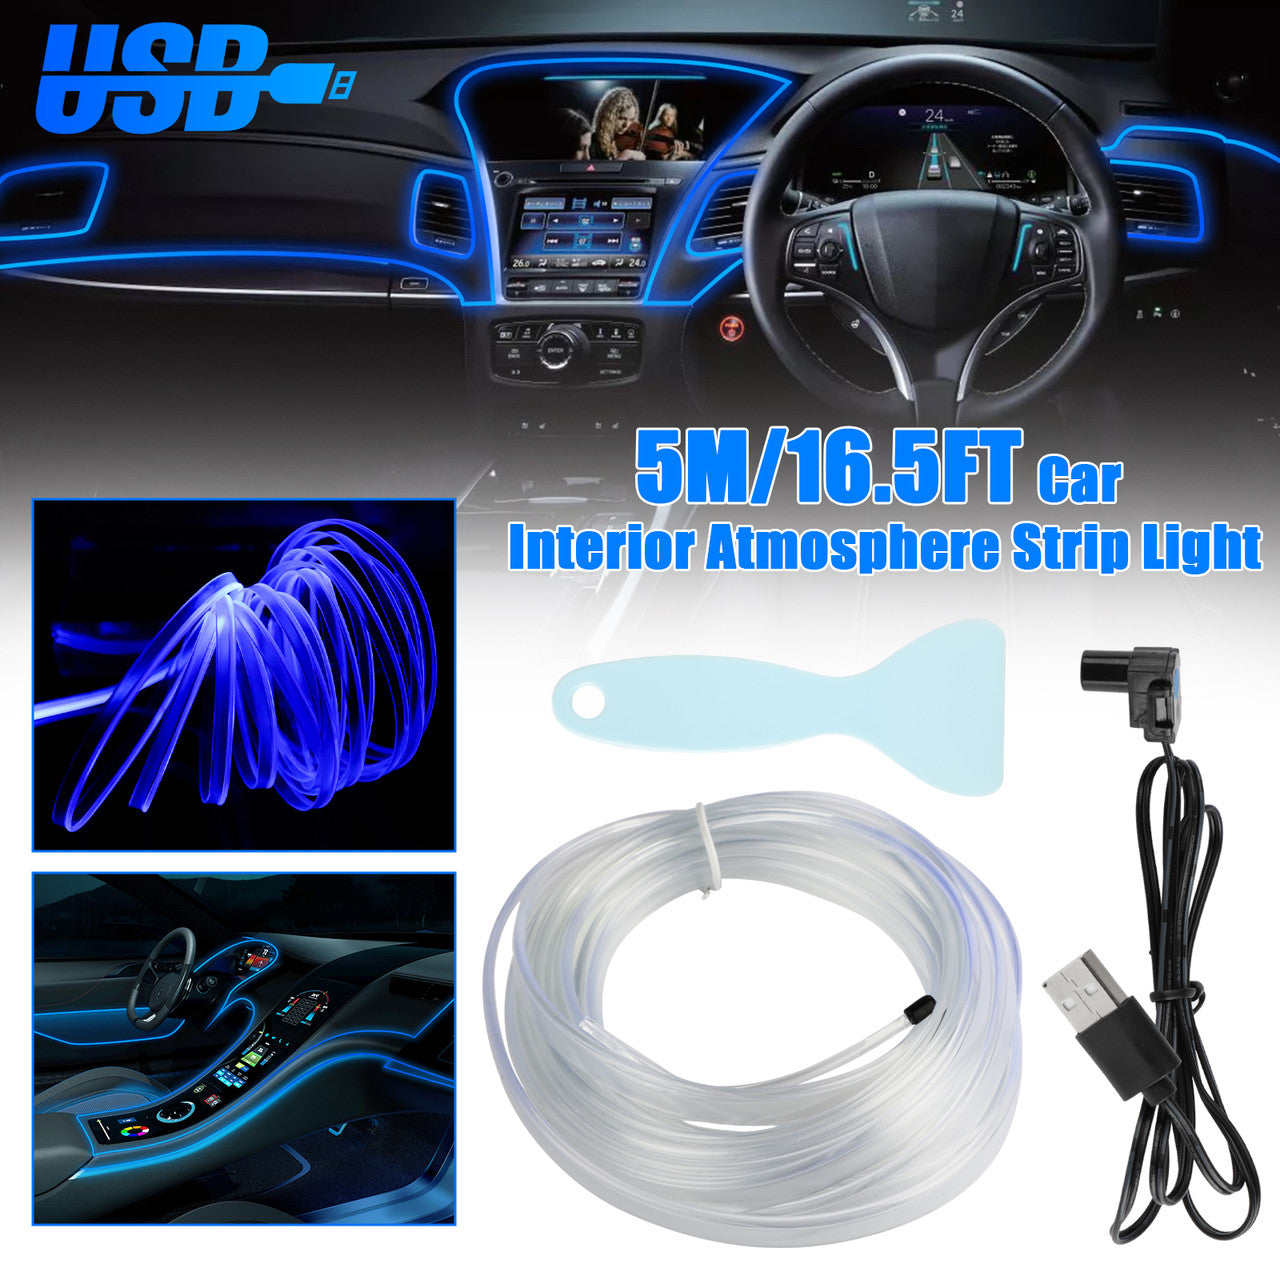 Wire Interior Car Led Strip Lights-5M/15FT USB Neon Glowing Strobing Electroluminescent Wire Lights with 6MM Sewing Edge, Ambient Lighting Kits